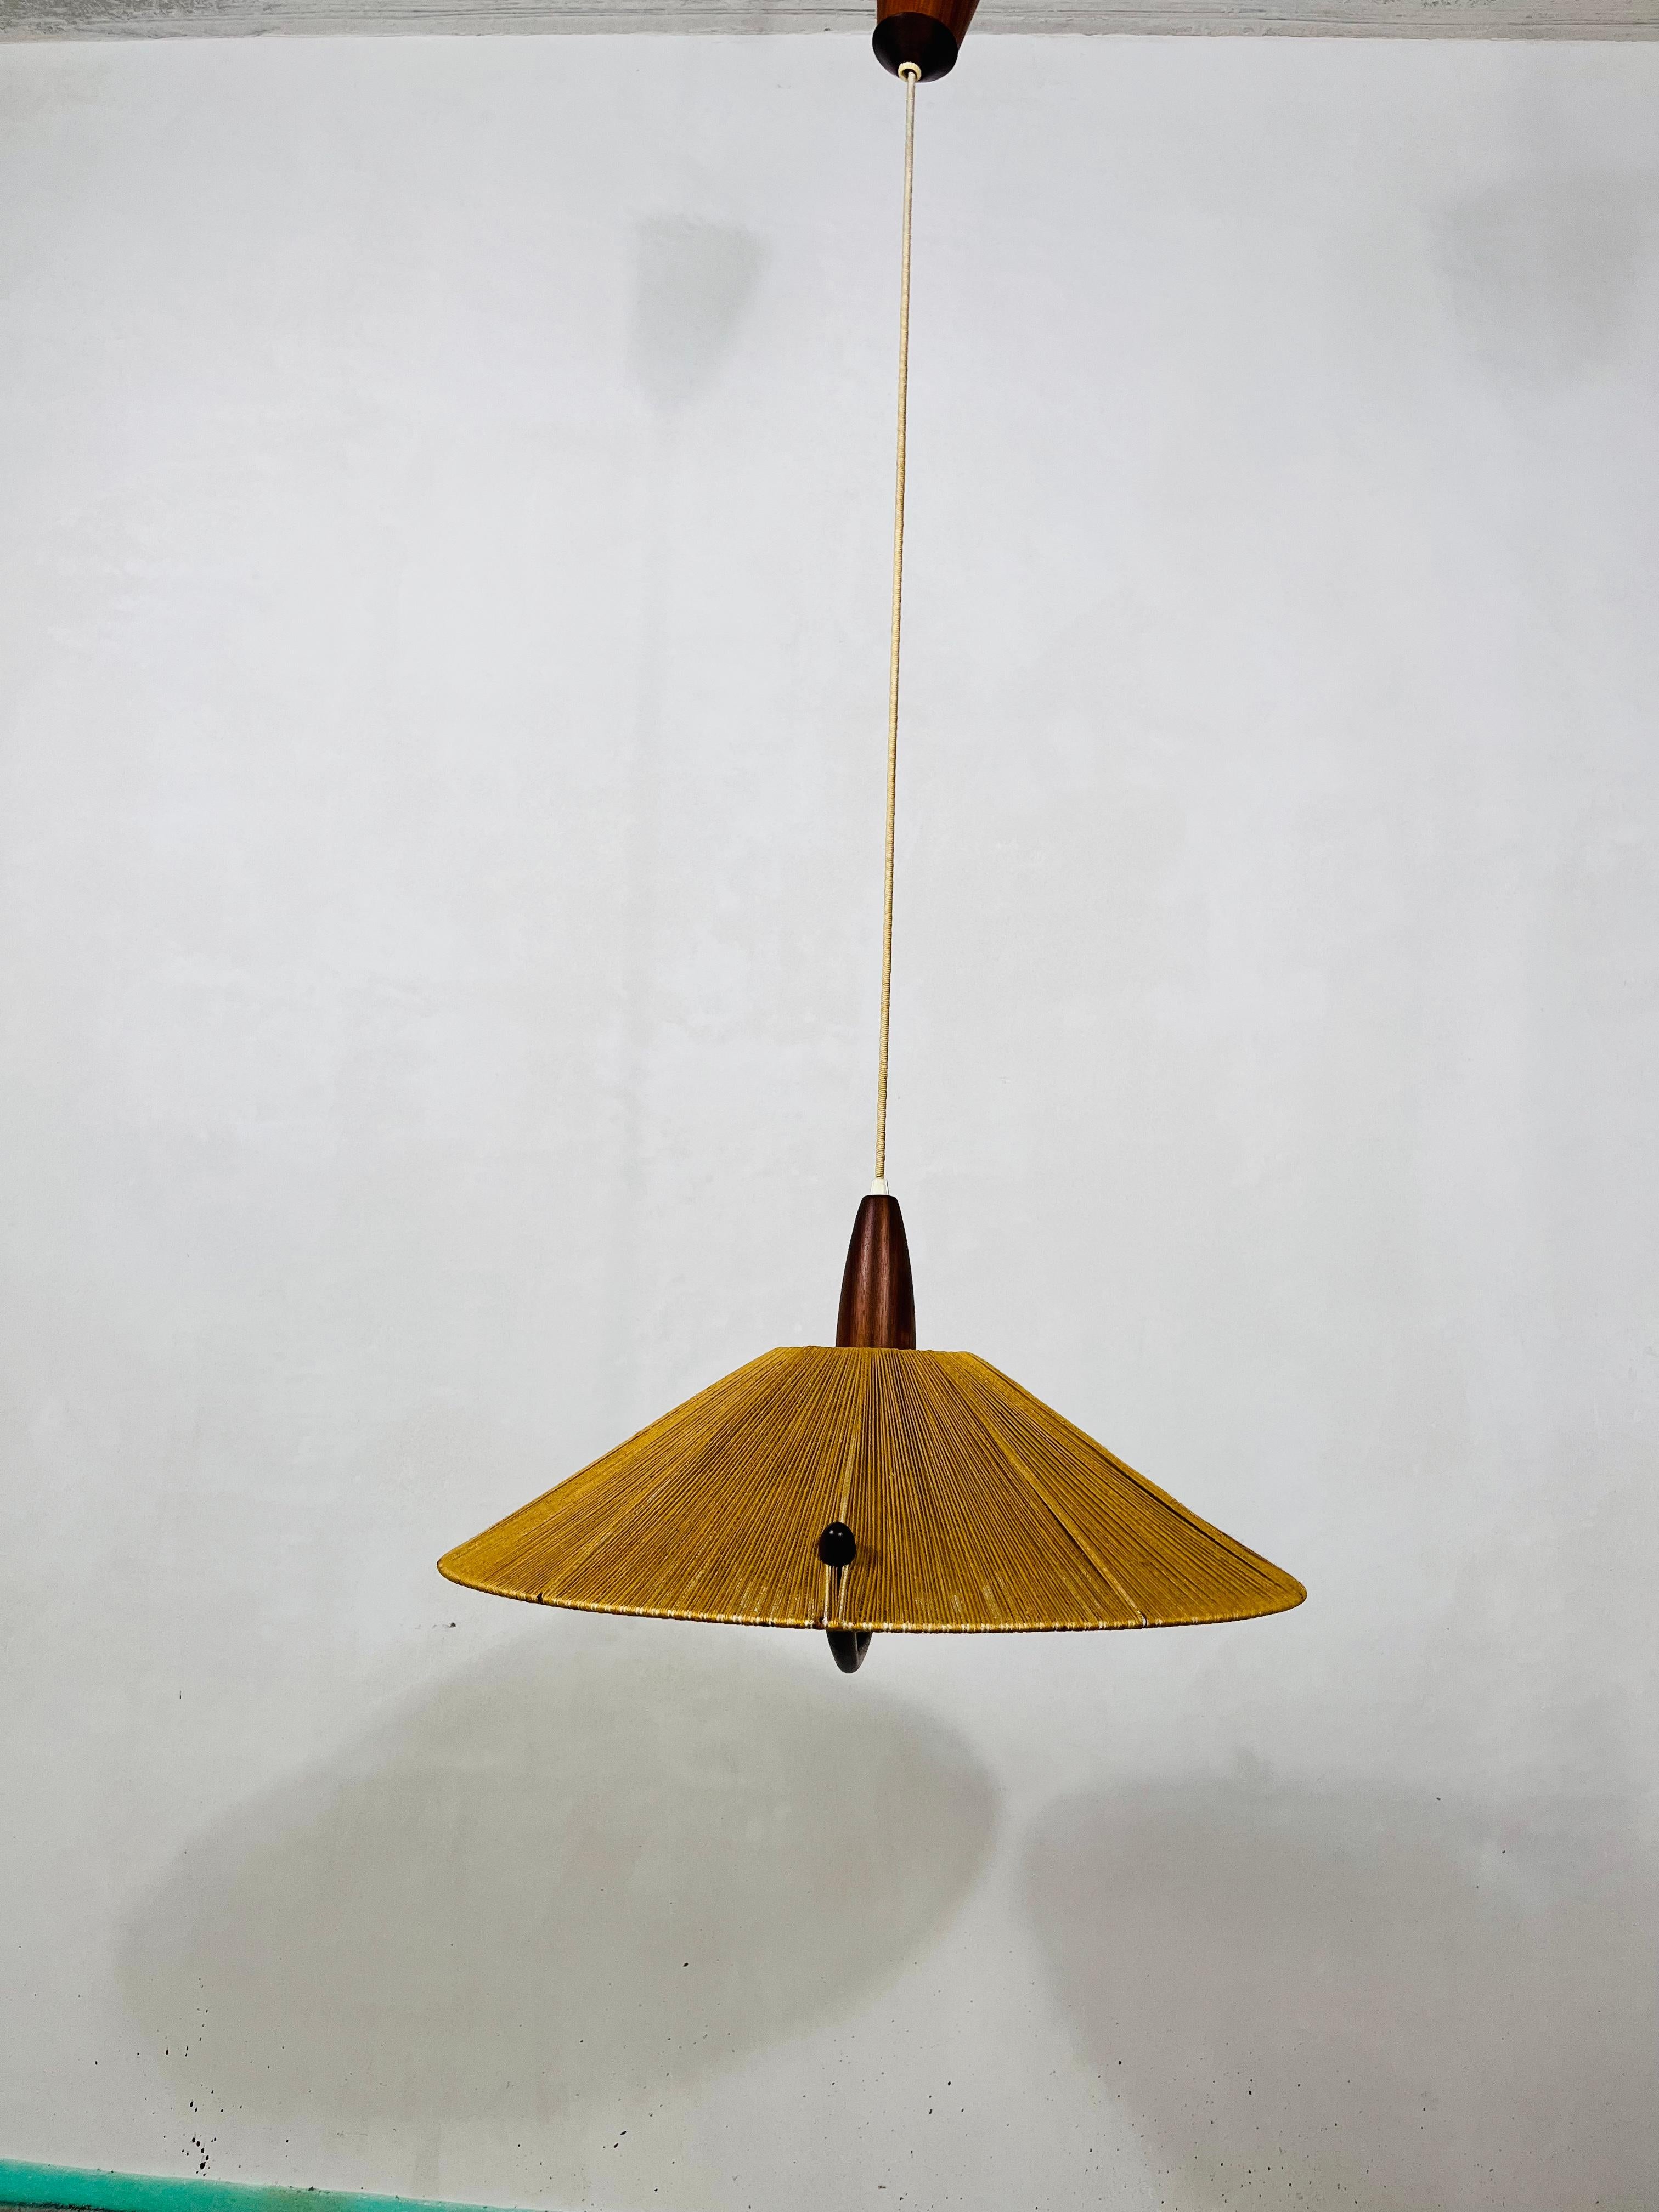 Midcentury Teak and Cord Shade Hanging Lamp by Temde, circa 1960 For Sale 3